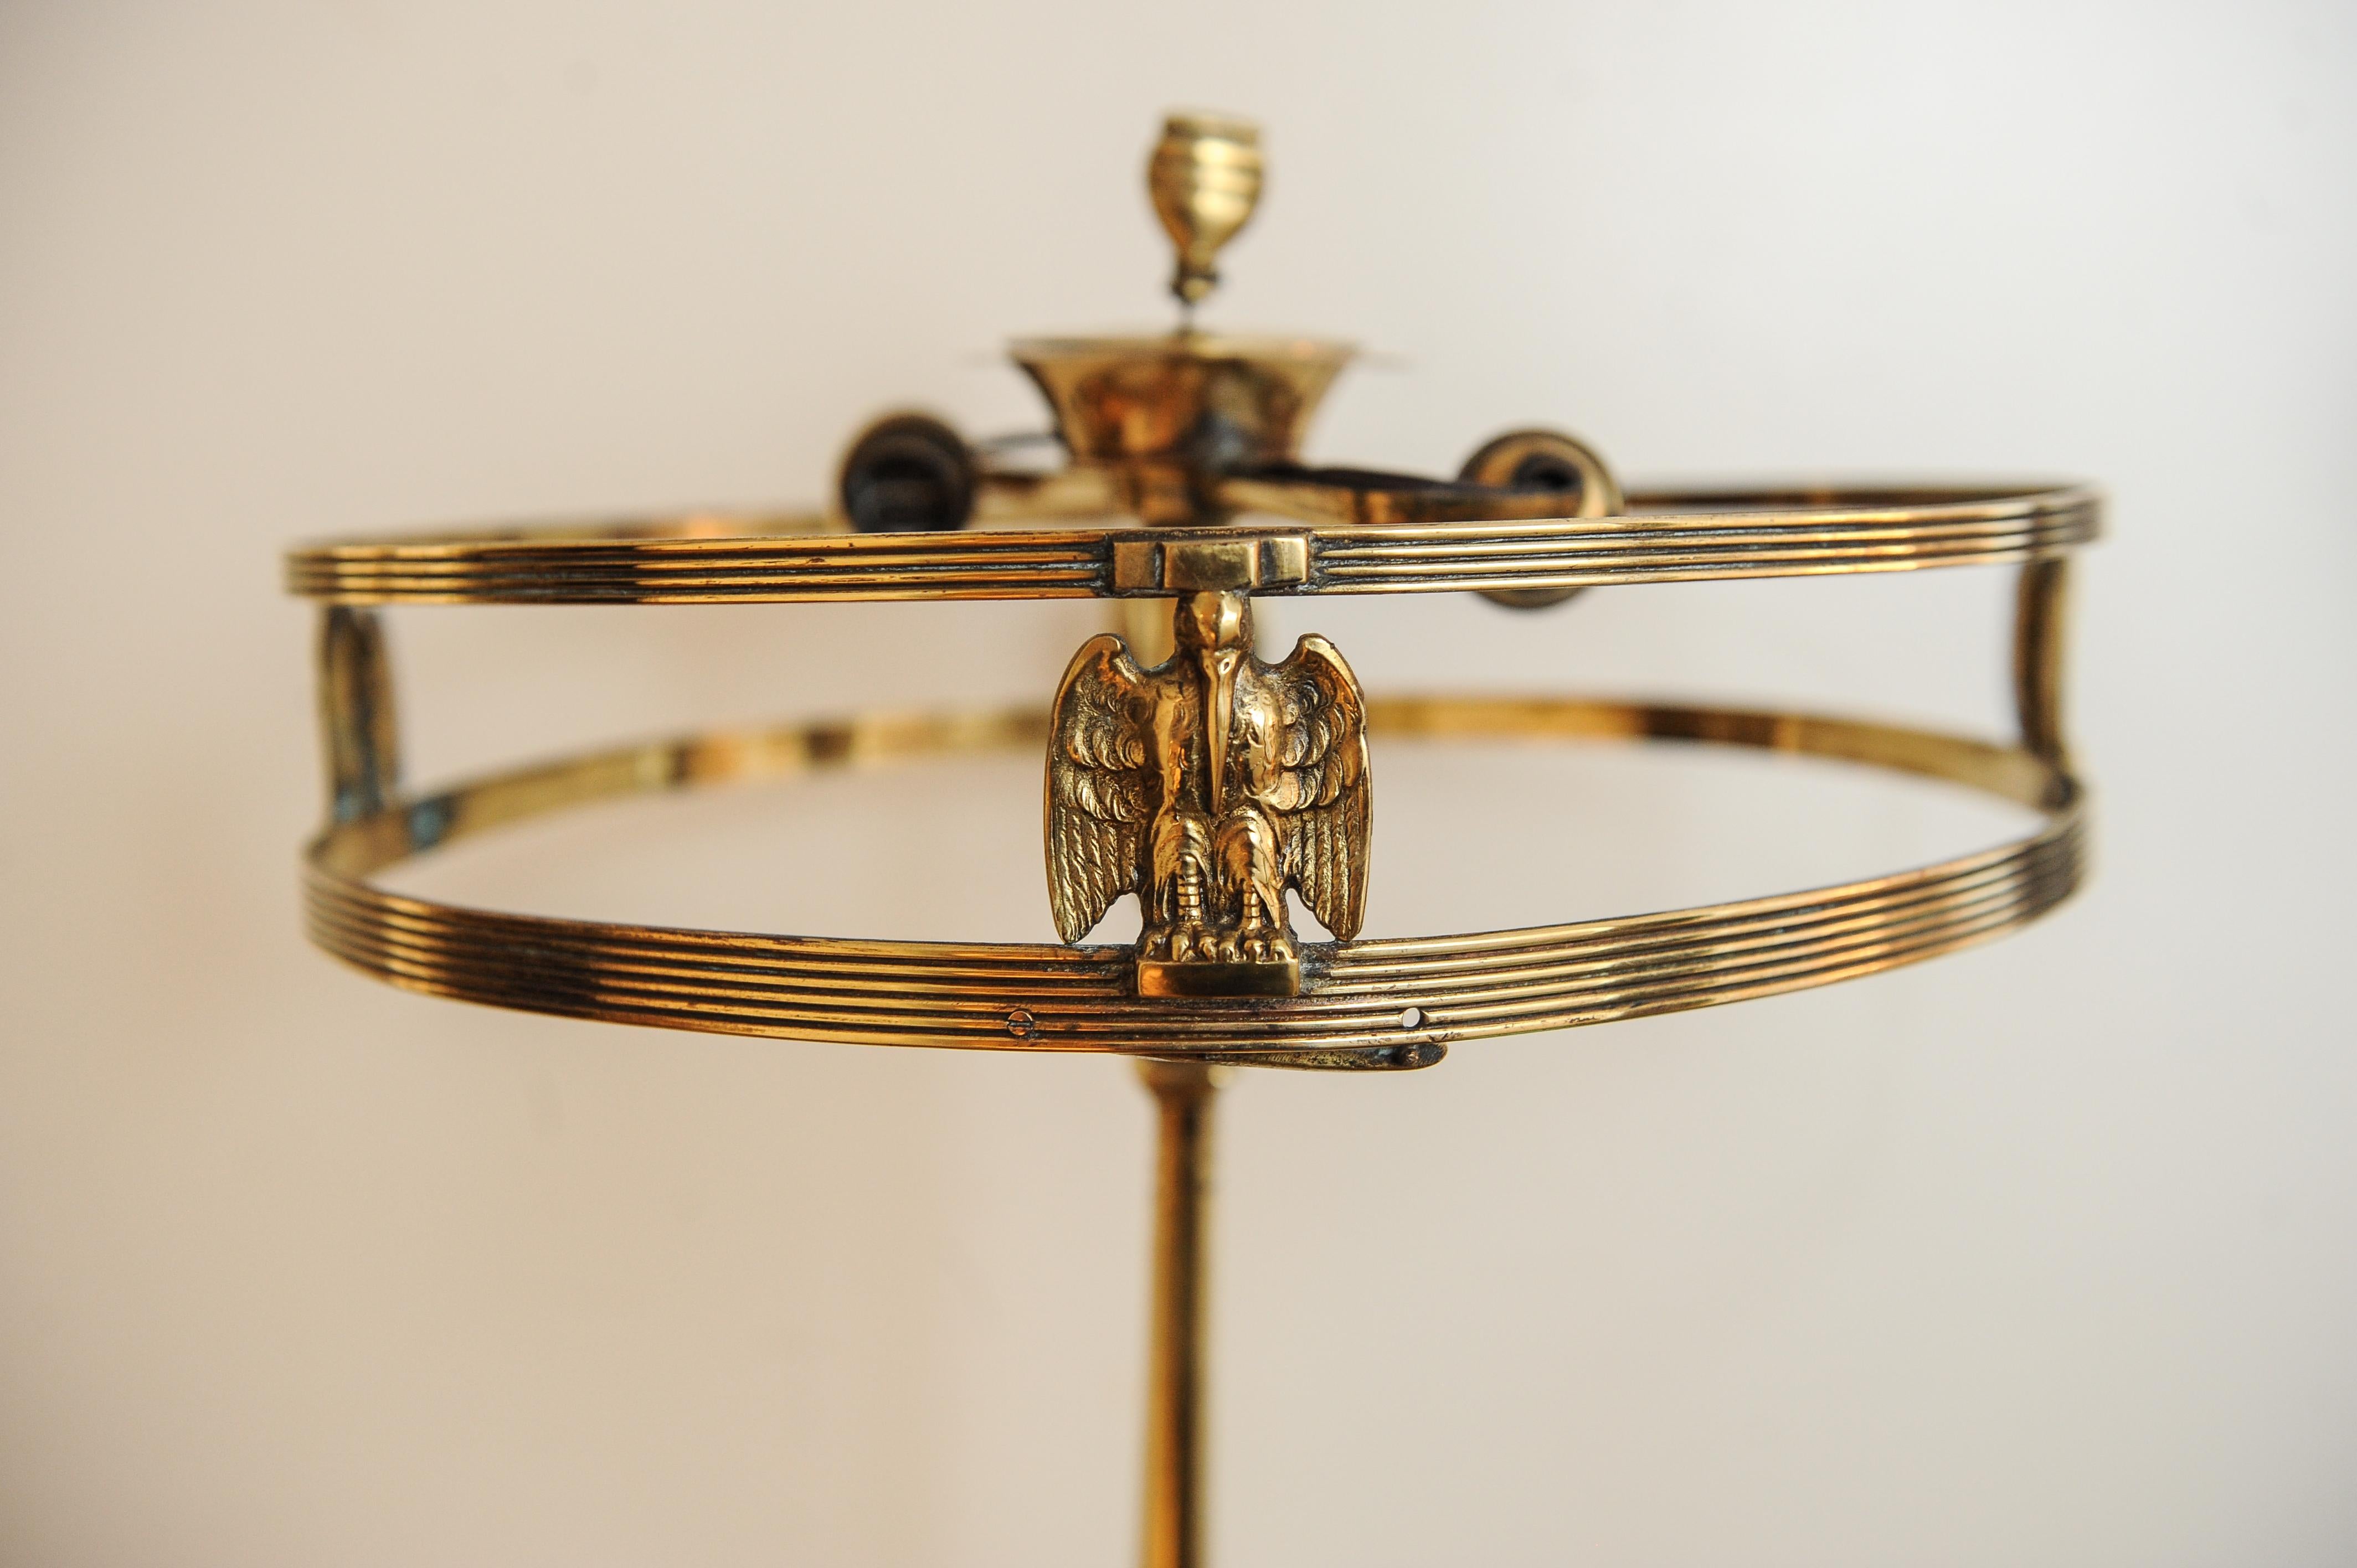 Hand-Crafted Art Nouveau circa 1930 Stiffel Brass Desk, Table Lamp With American Bald Eagles For Sale